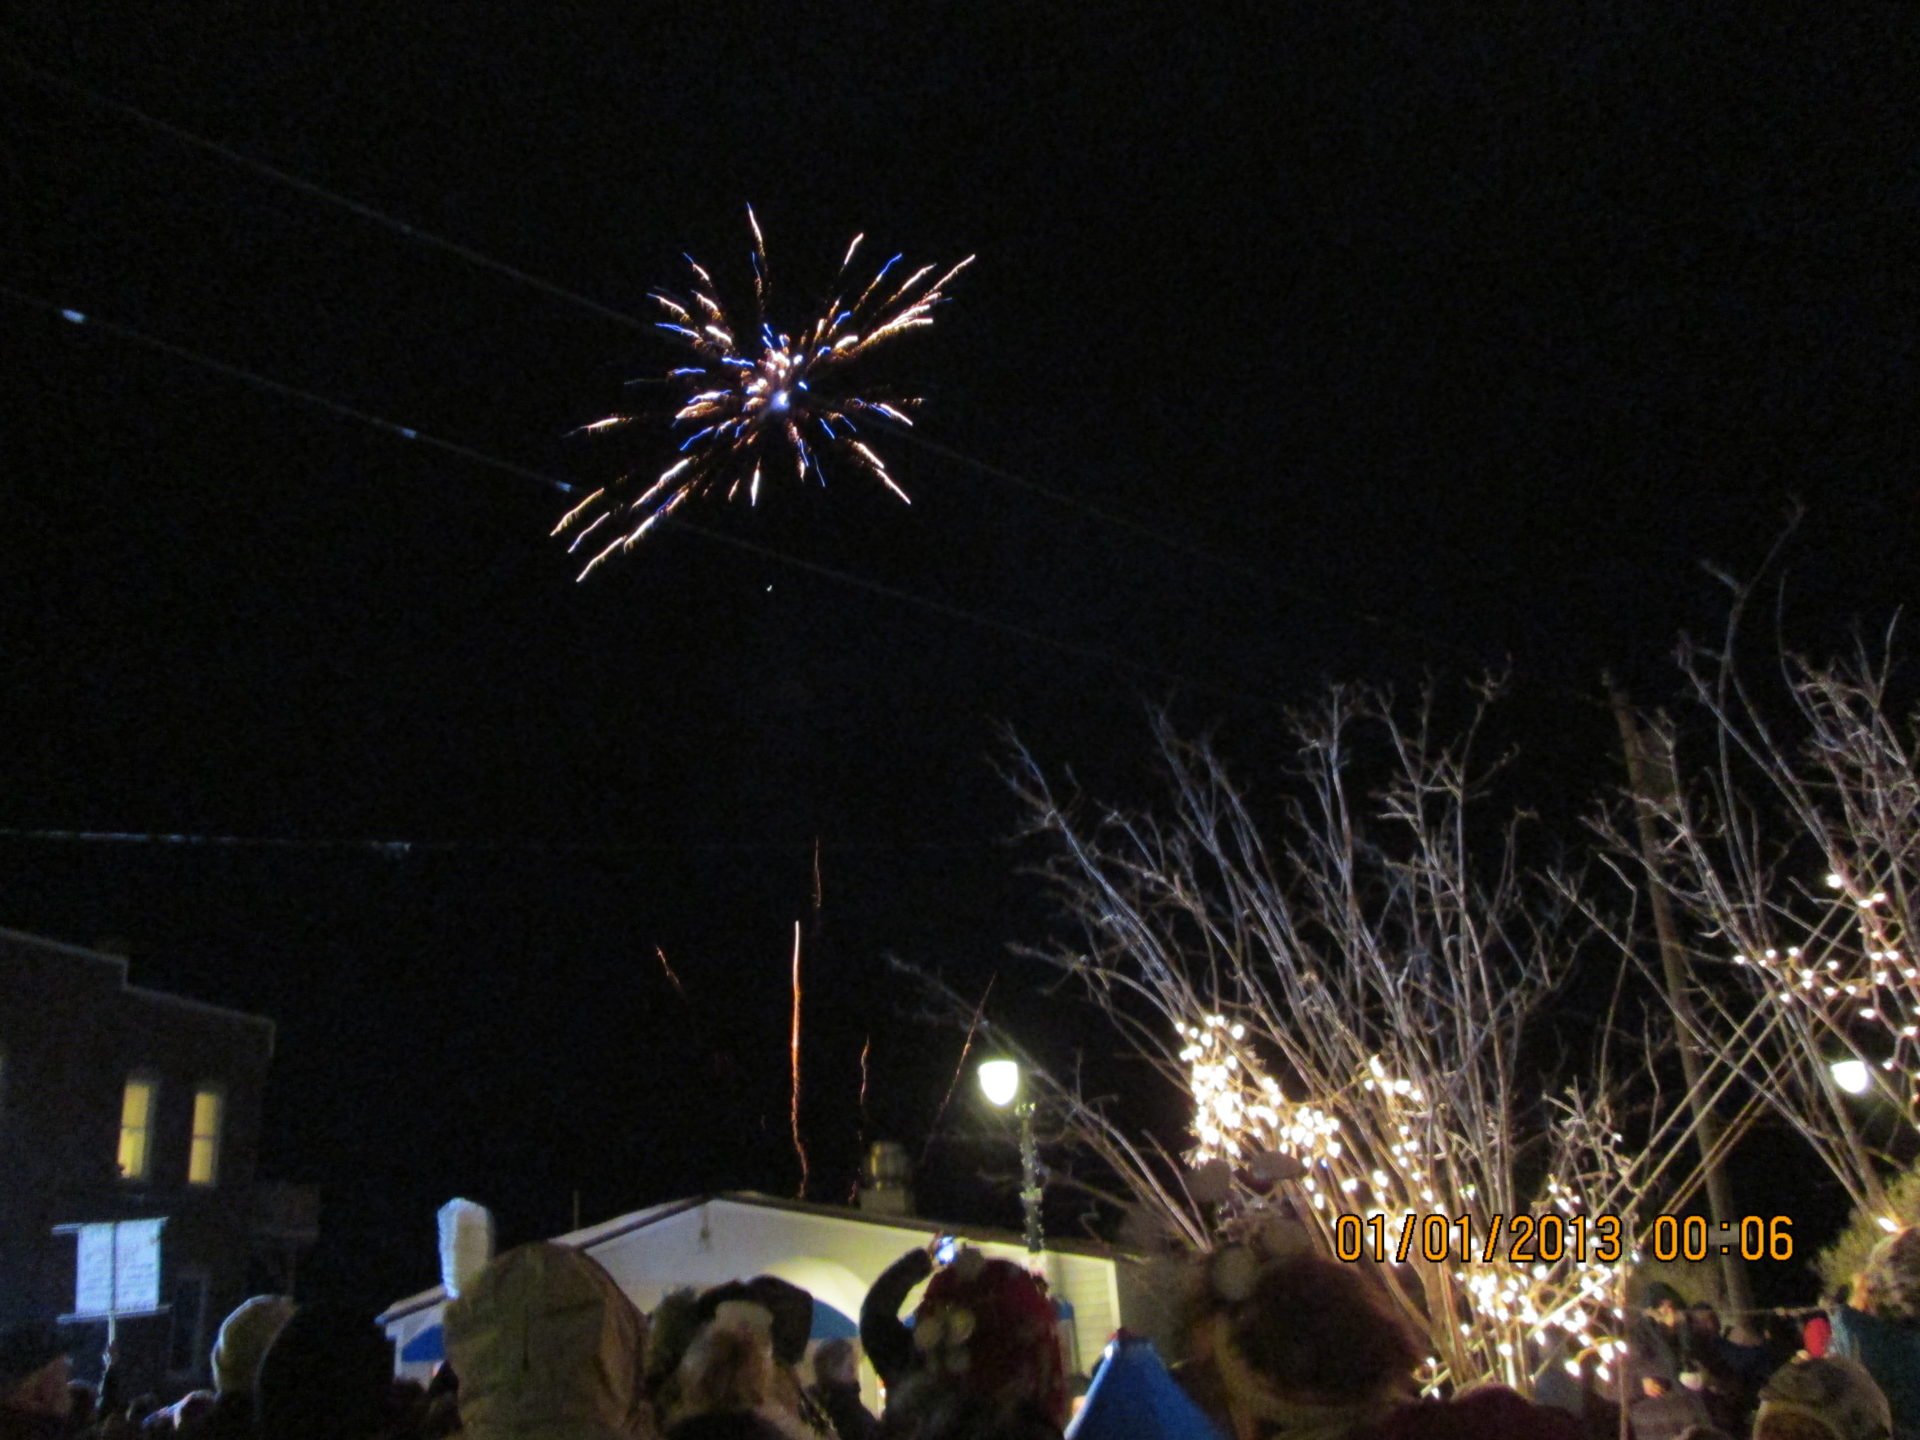 Quirky New Year's Eve in Eastport, Maine 50 Plusses